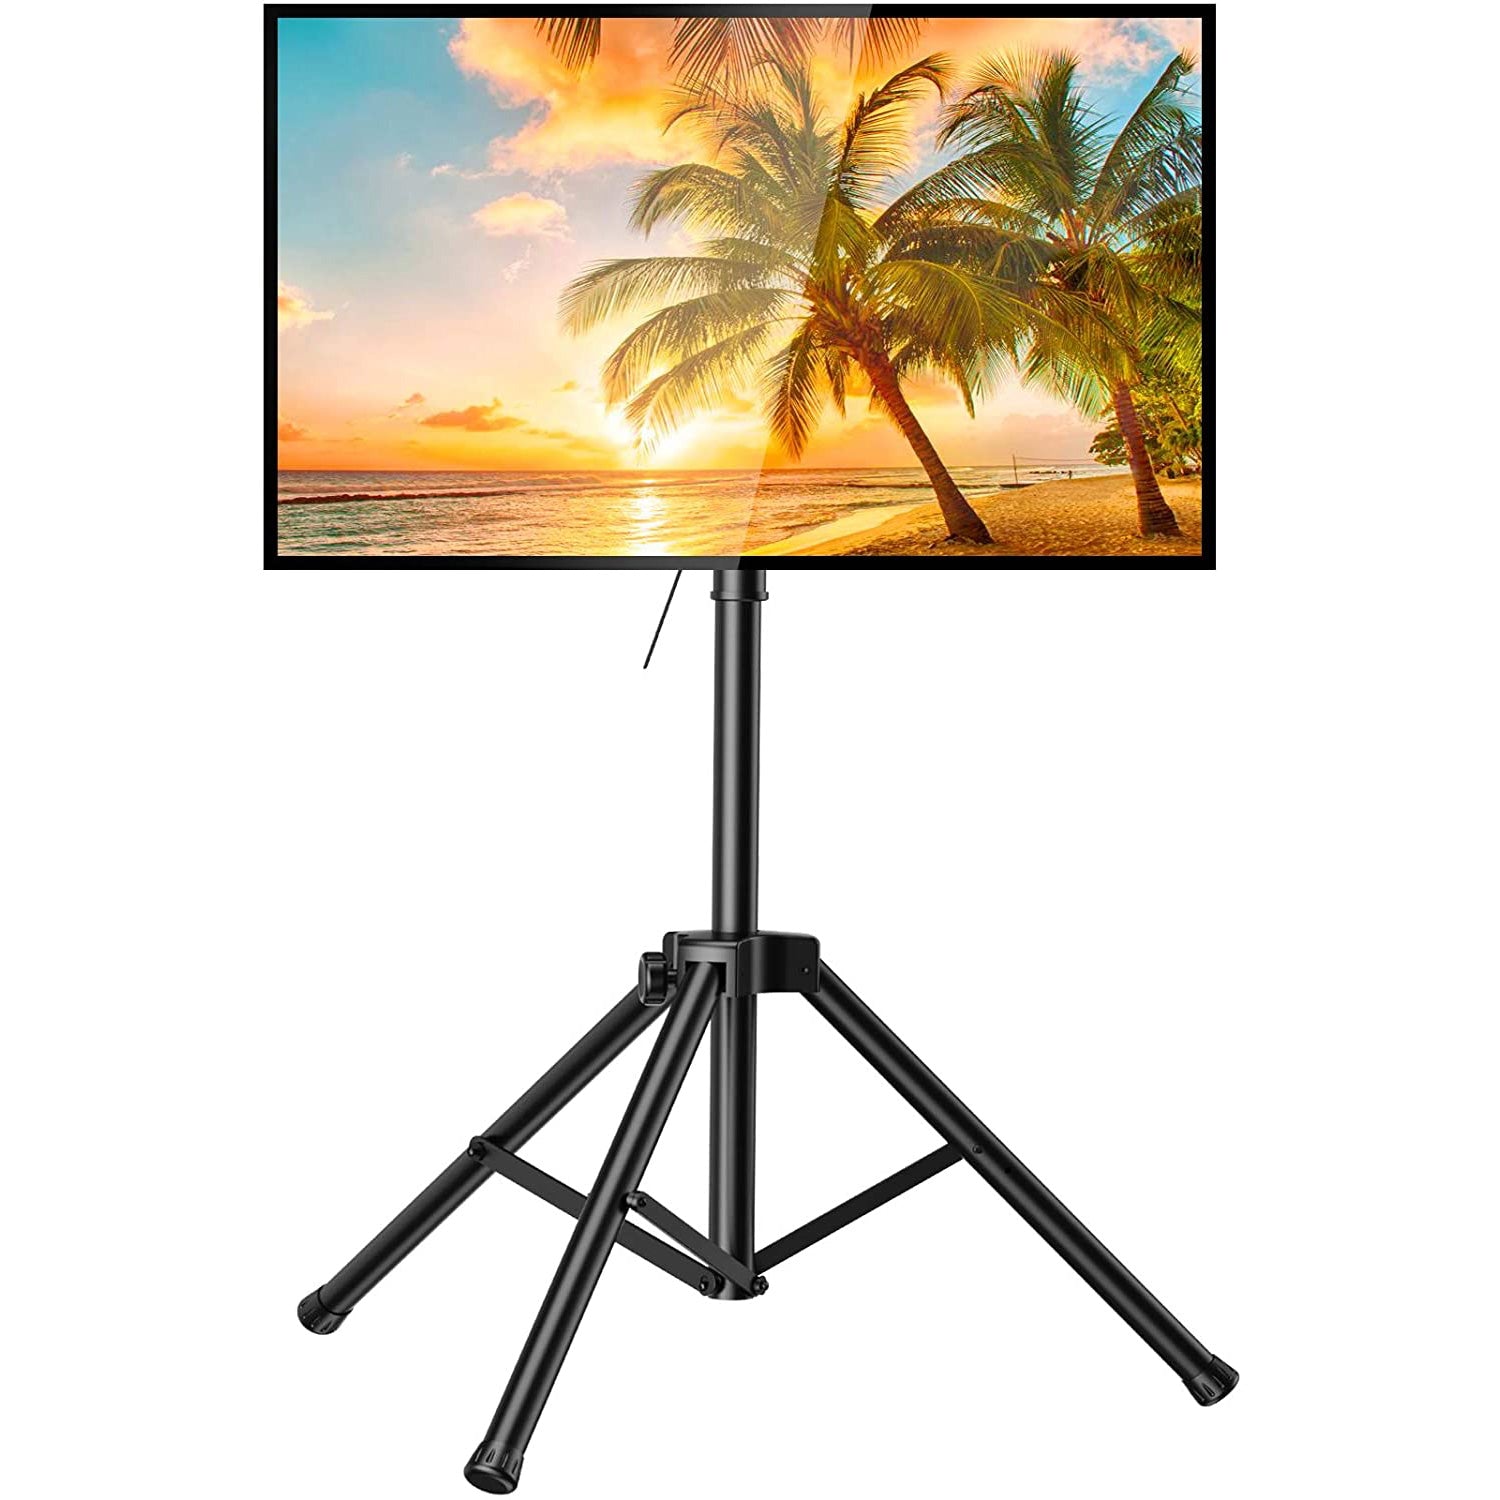 Portable Tripod TV Stand For 37